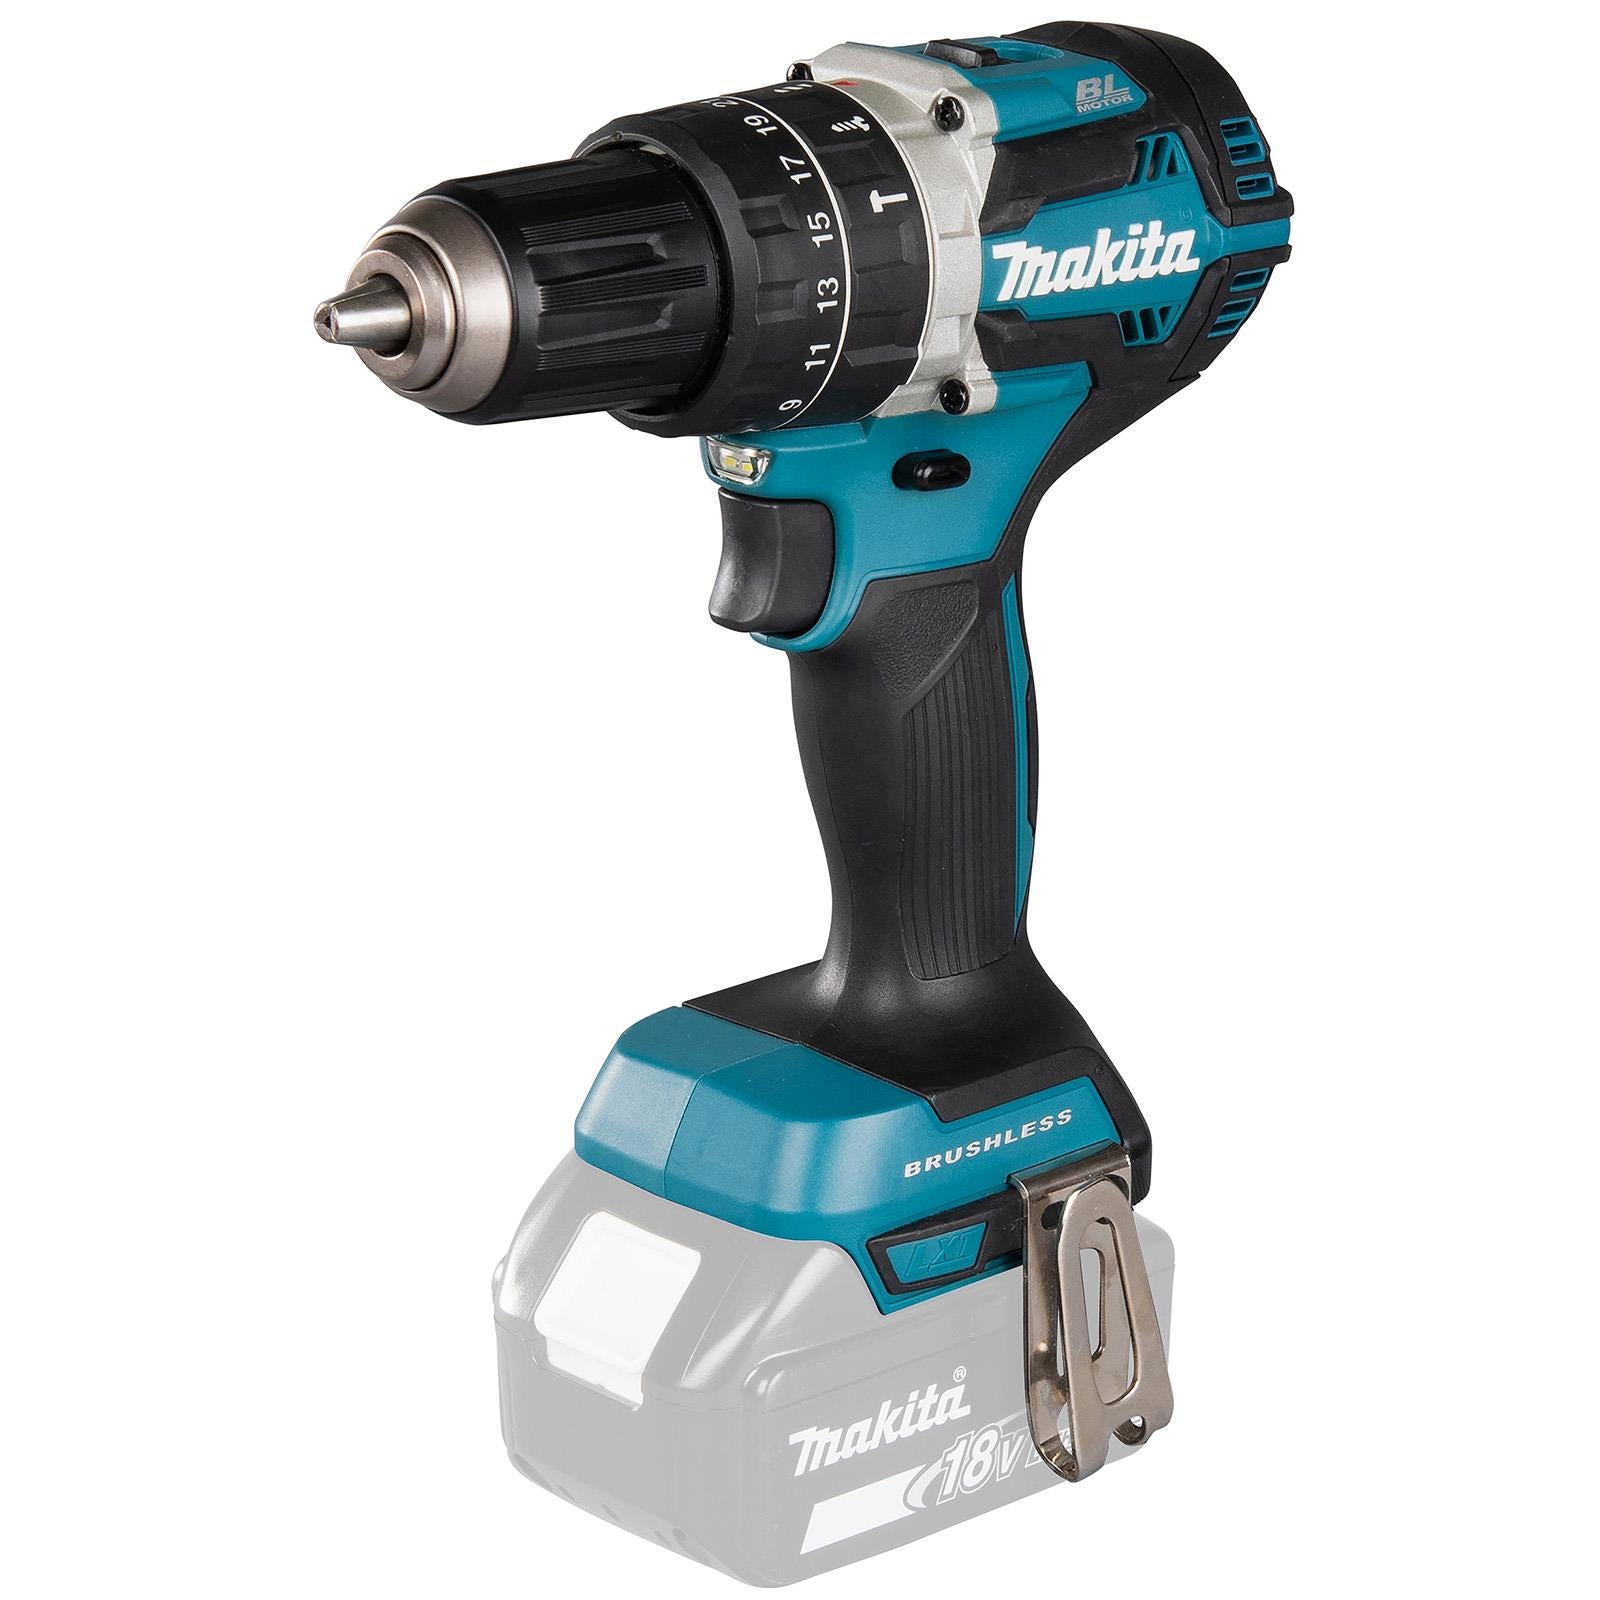 Makita Combi Drill Kit 18V LXT DHP484 with 5Ah Battery Charger 101pc Tool Set Cordless Brushless DHP484STX5